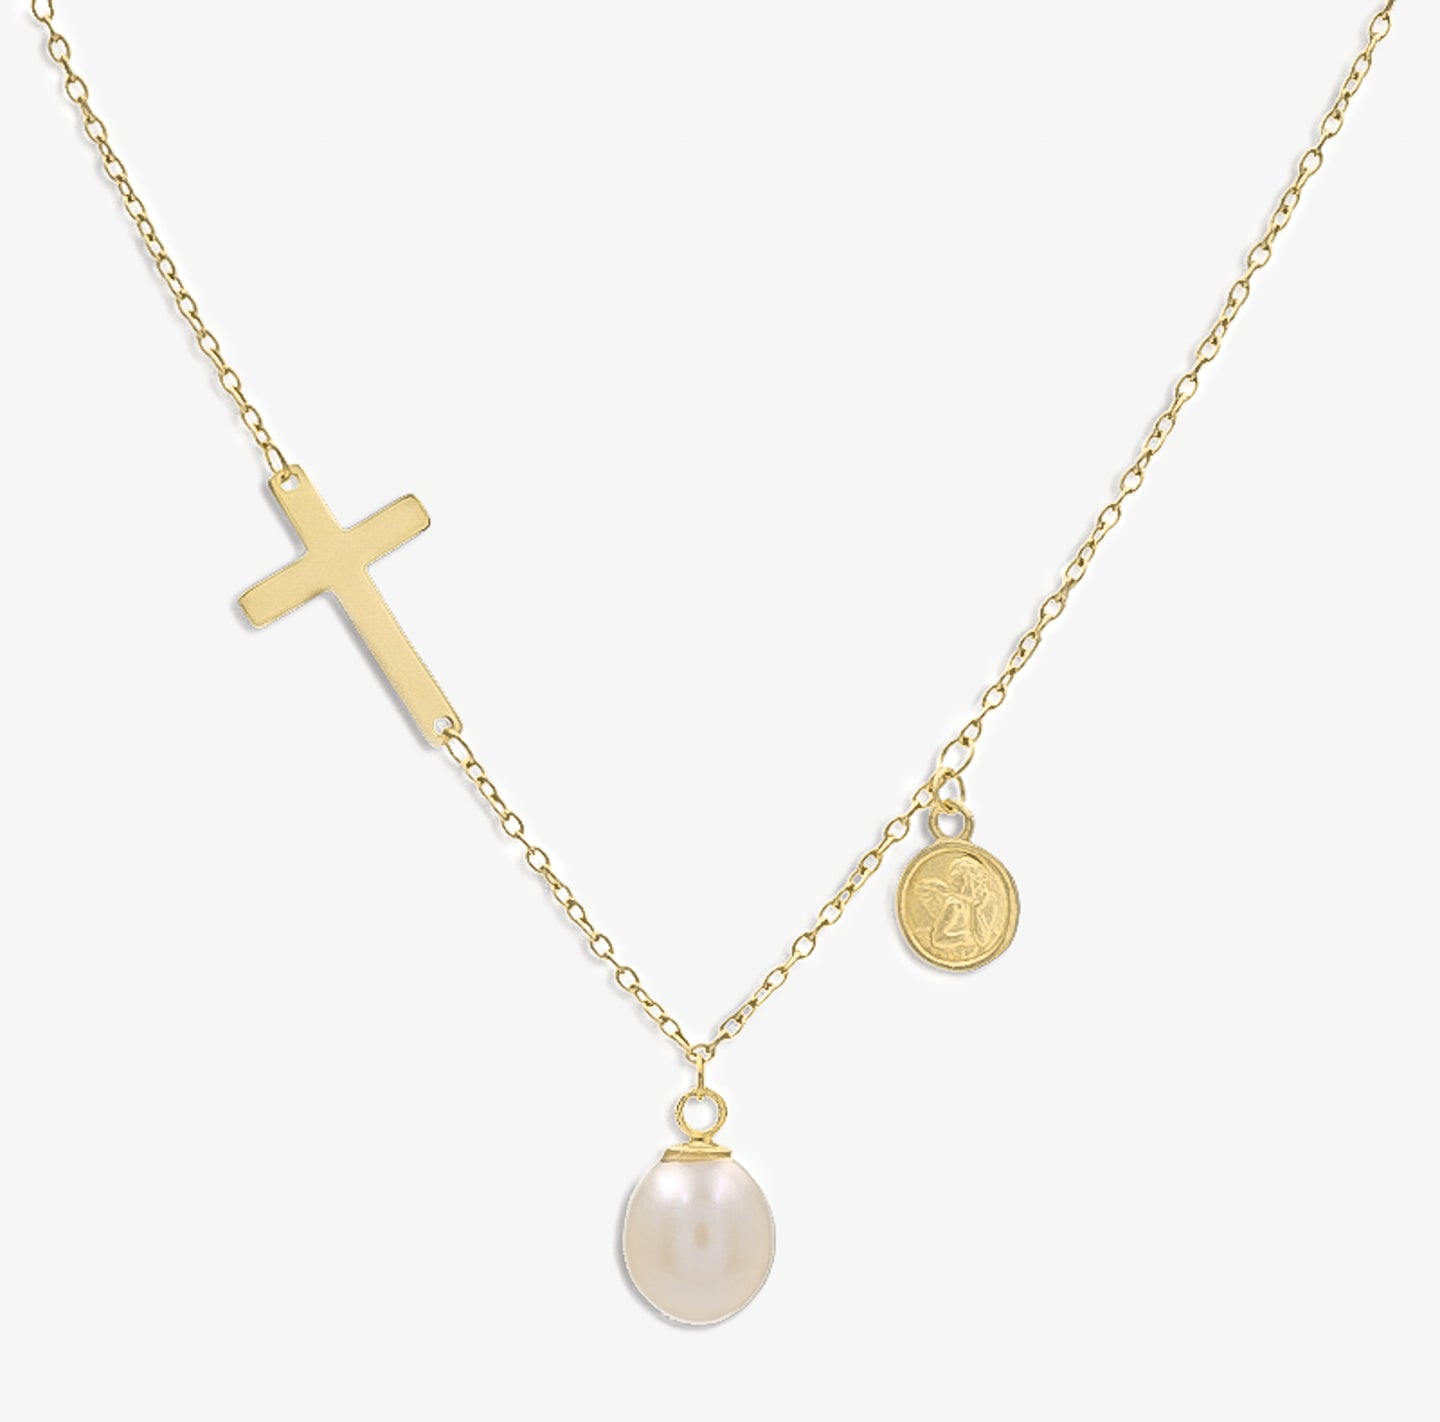 18k Gold Vermeil Pearl Necklace with Coin and Cross